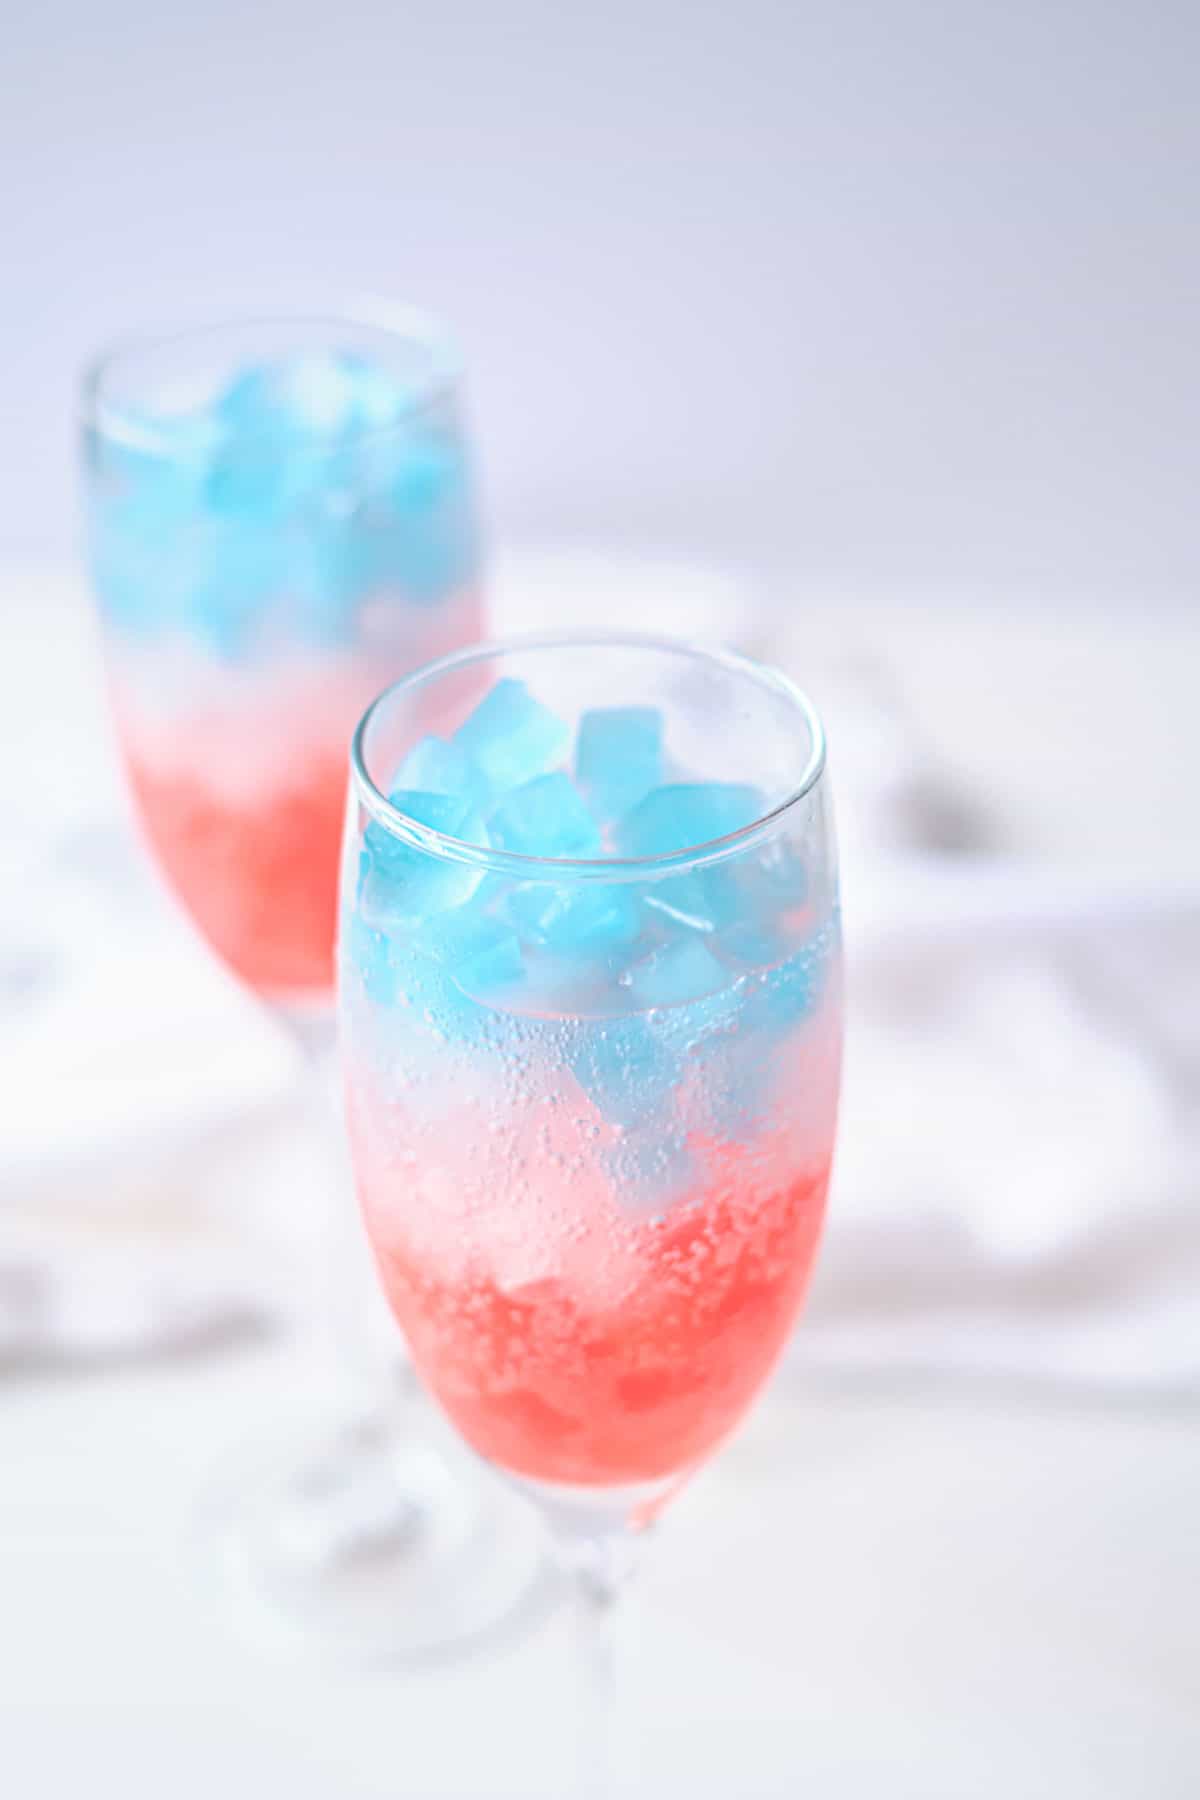 2 glasses filled with patriotic ice cubes in some sprite